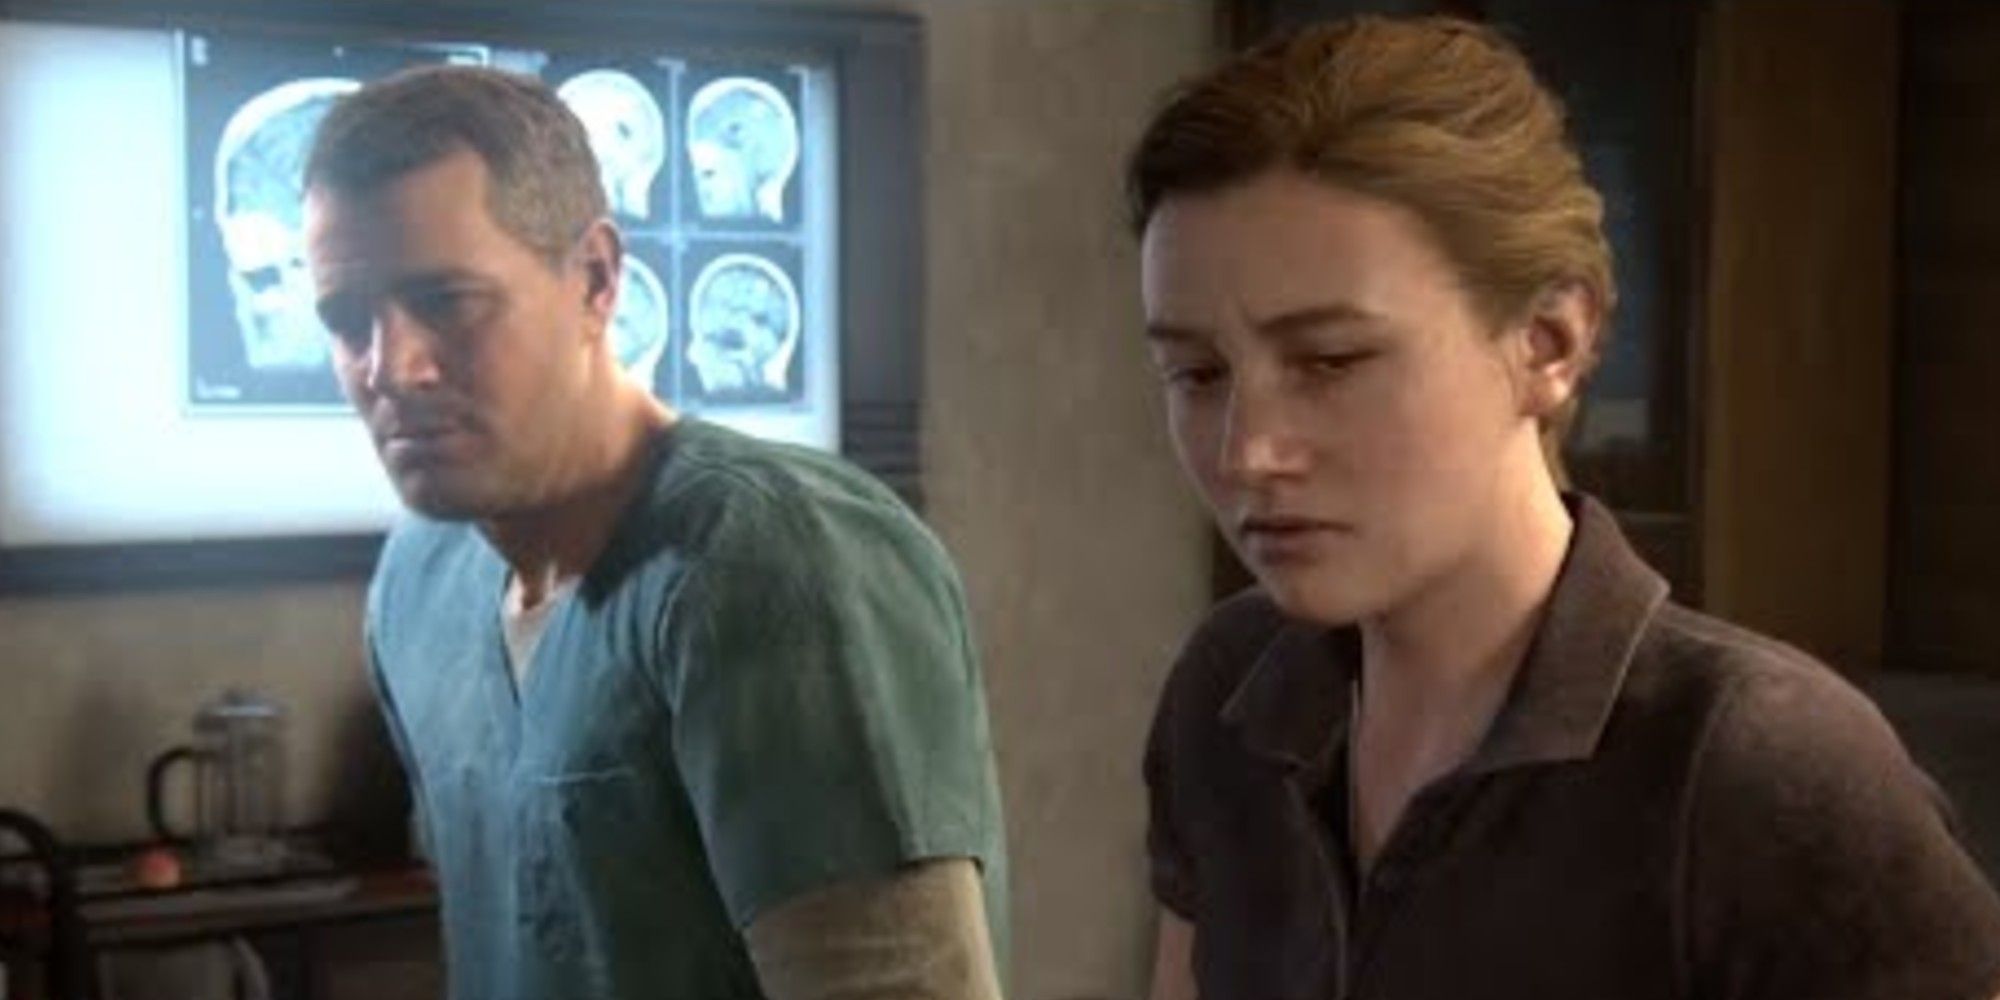 Who Is Abby in 'The Last of Us?' Abby Anderson, Explained